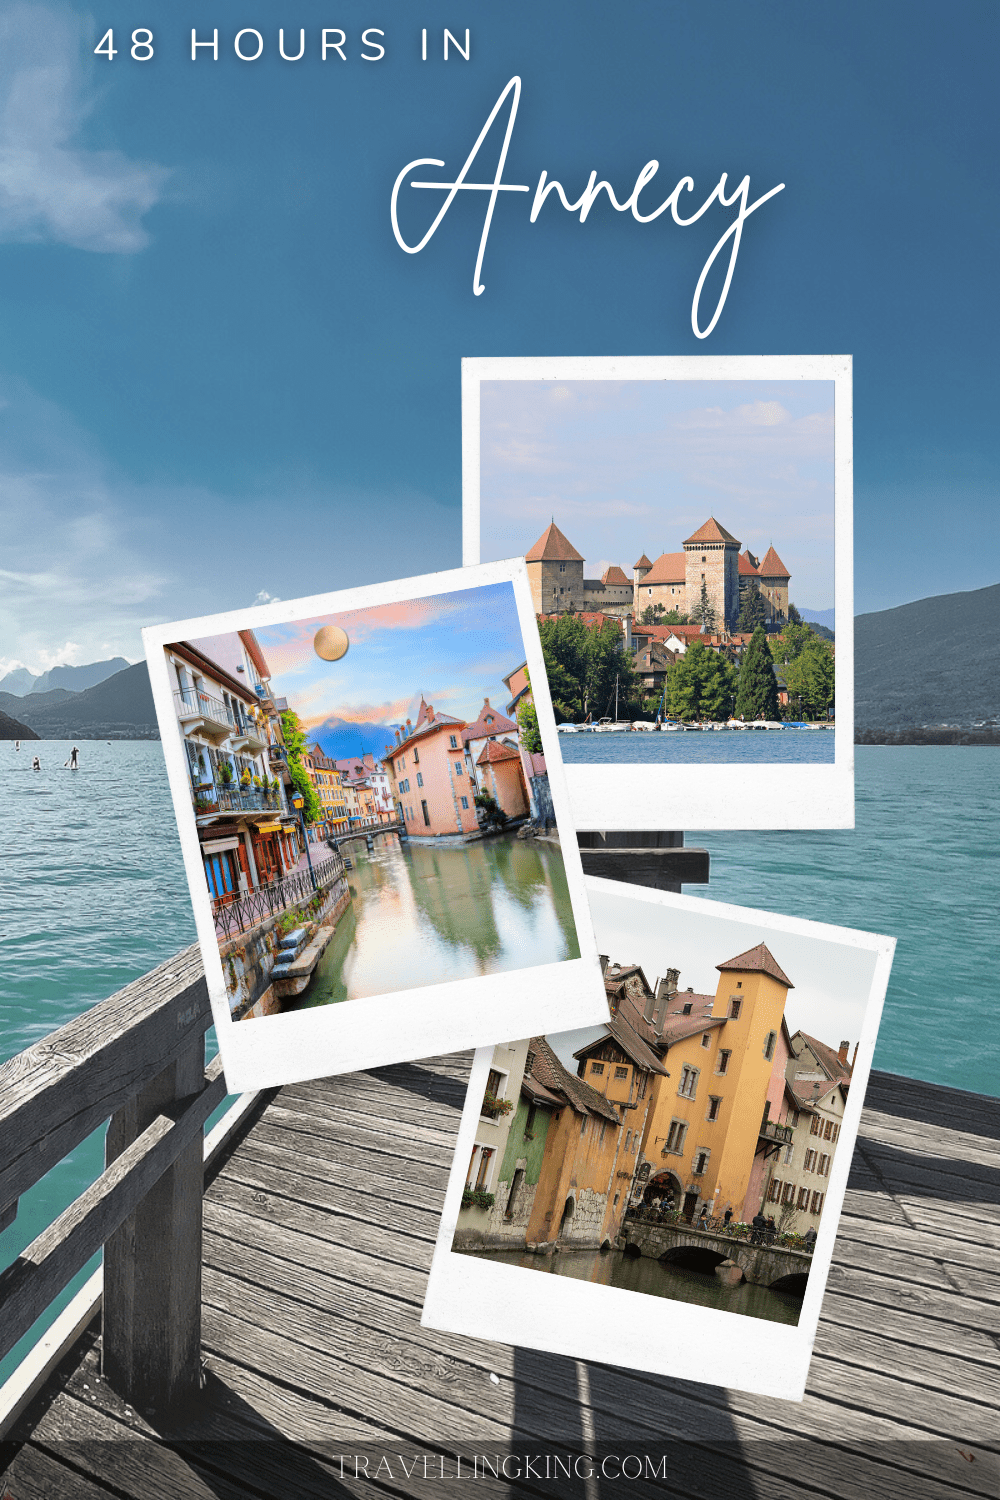 48 Hours in Annecy - 2 Day itinerary